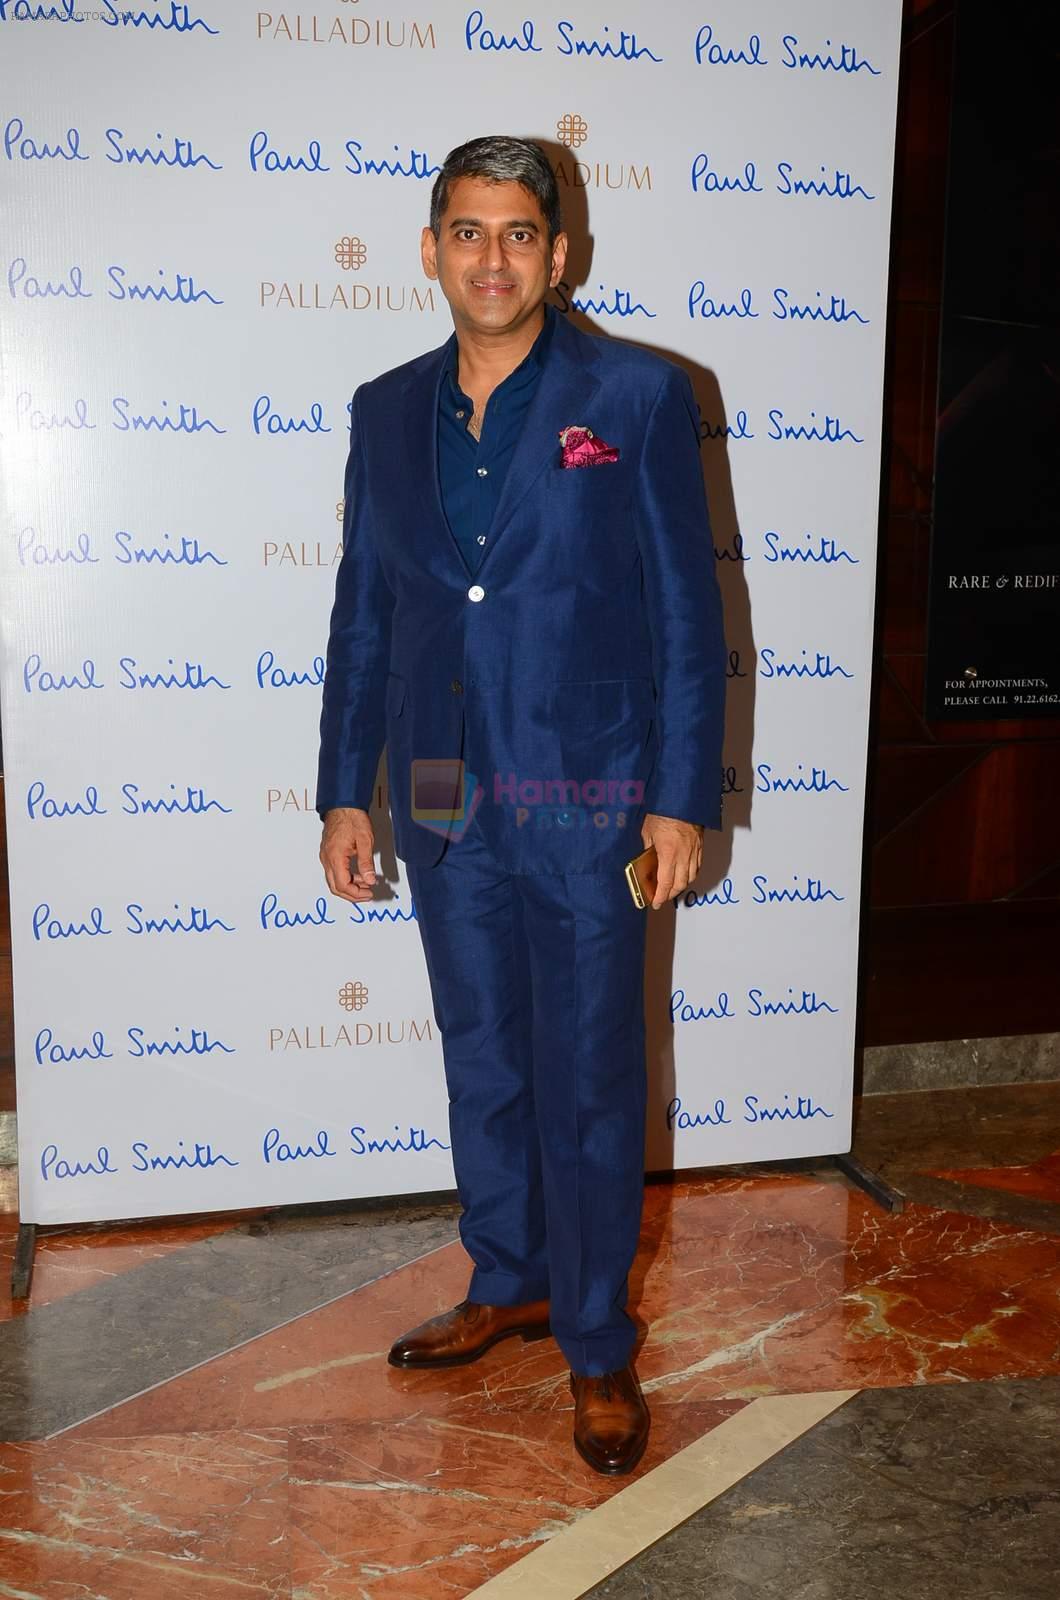 at Paul Smith event in Palladium on 16th Sept 2015